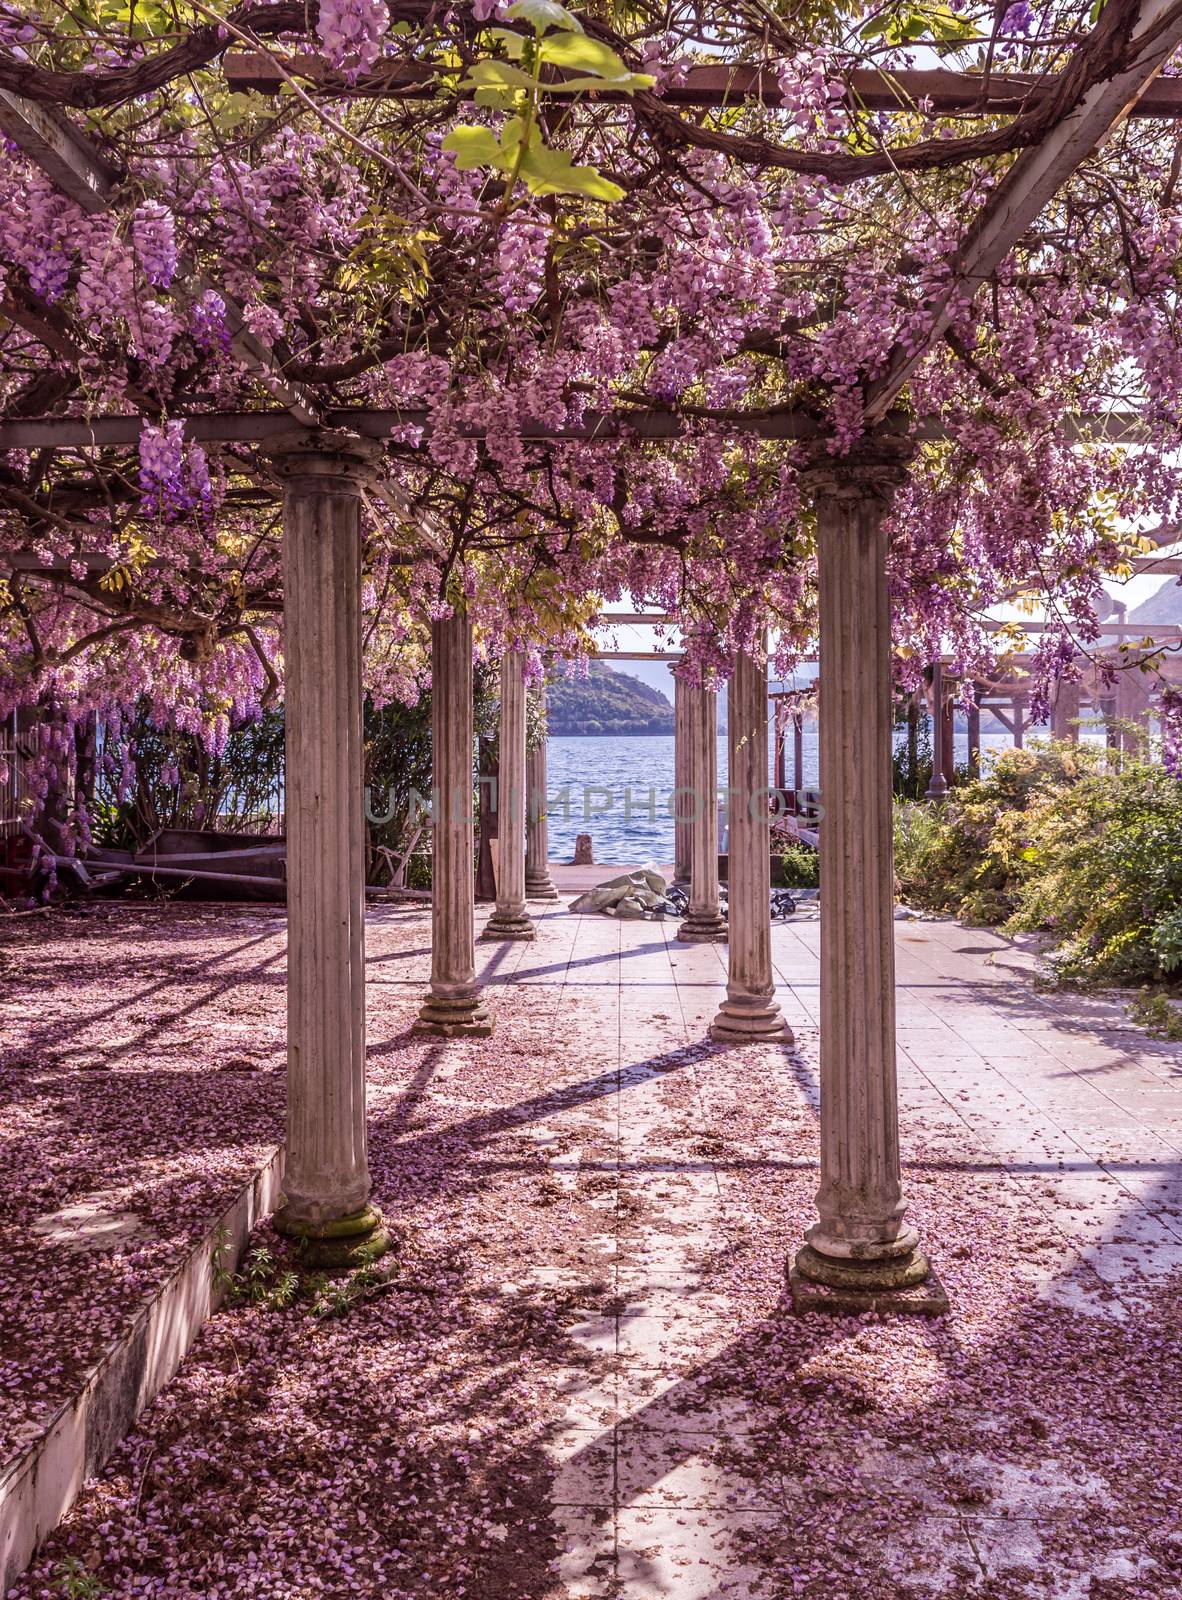 Beautiful front yard with pillars and wisteria flowers  by radzonimo